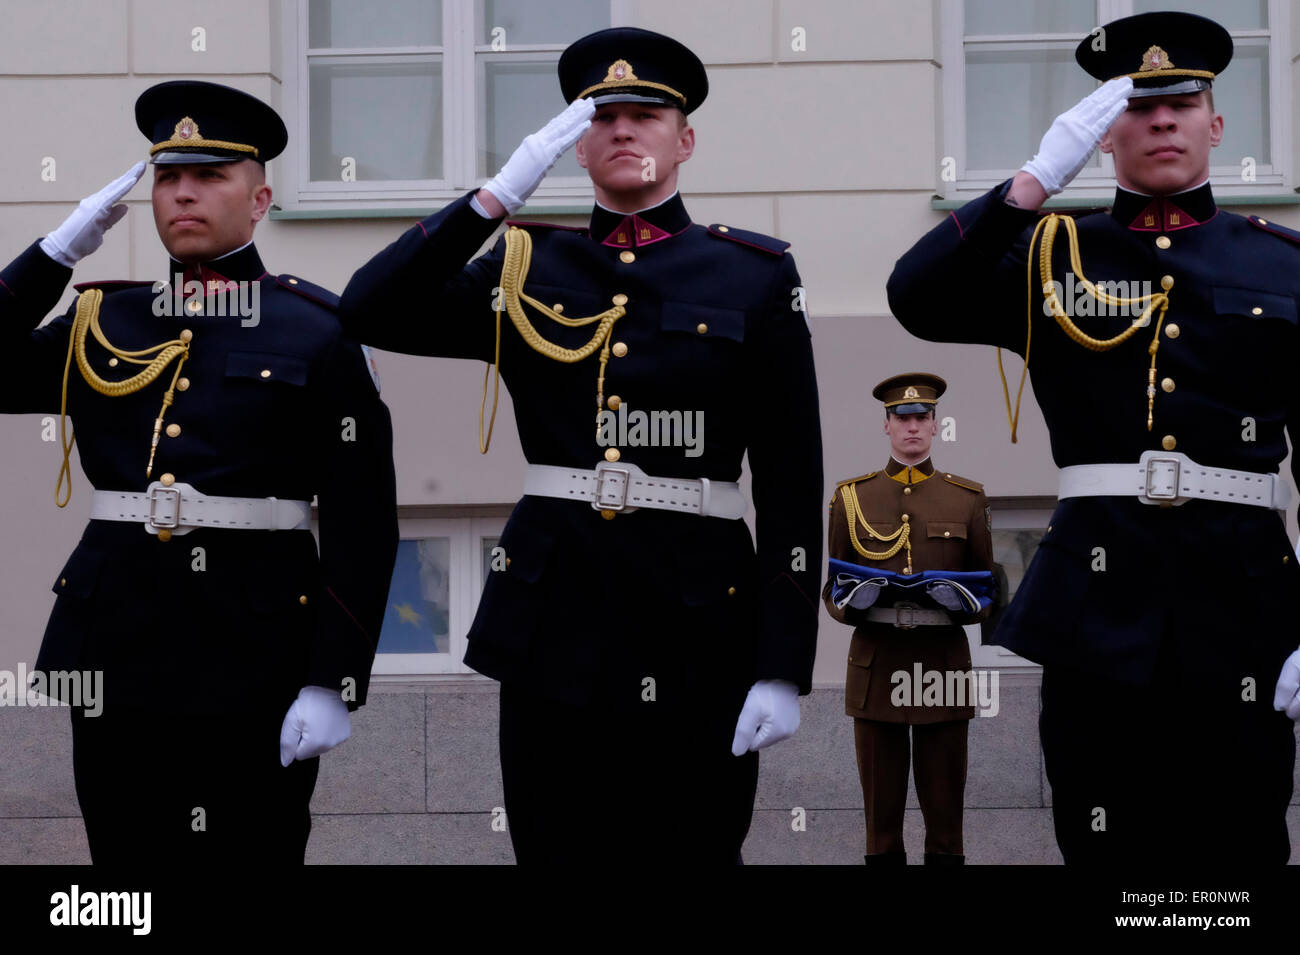 Members of the Lithuanian Air Force or LAF the military aviation branch of the Lithuanian armed forces taking part in the Changing of Guards ceremony in front of  the Presidential palace in the old city of Vilnius, the capital of Lithuania Stock Photo